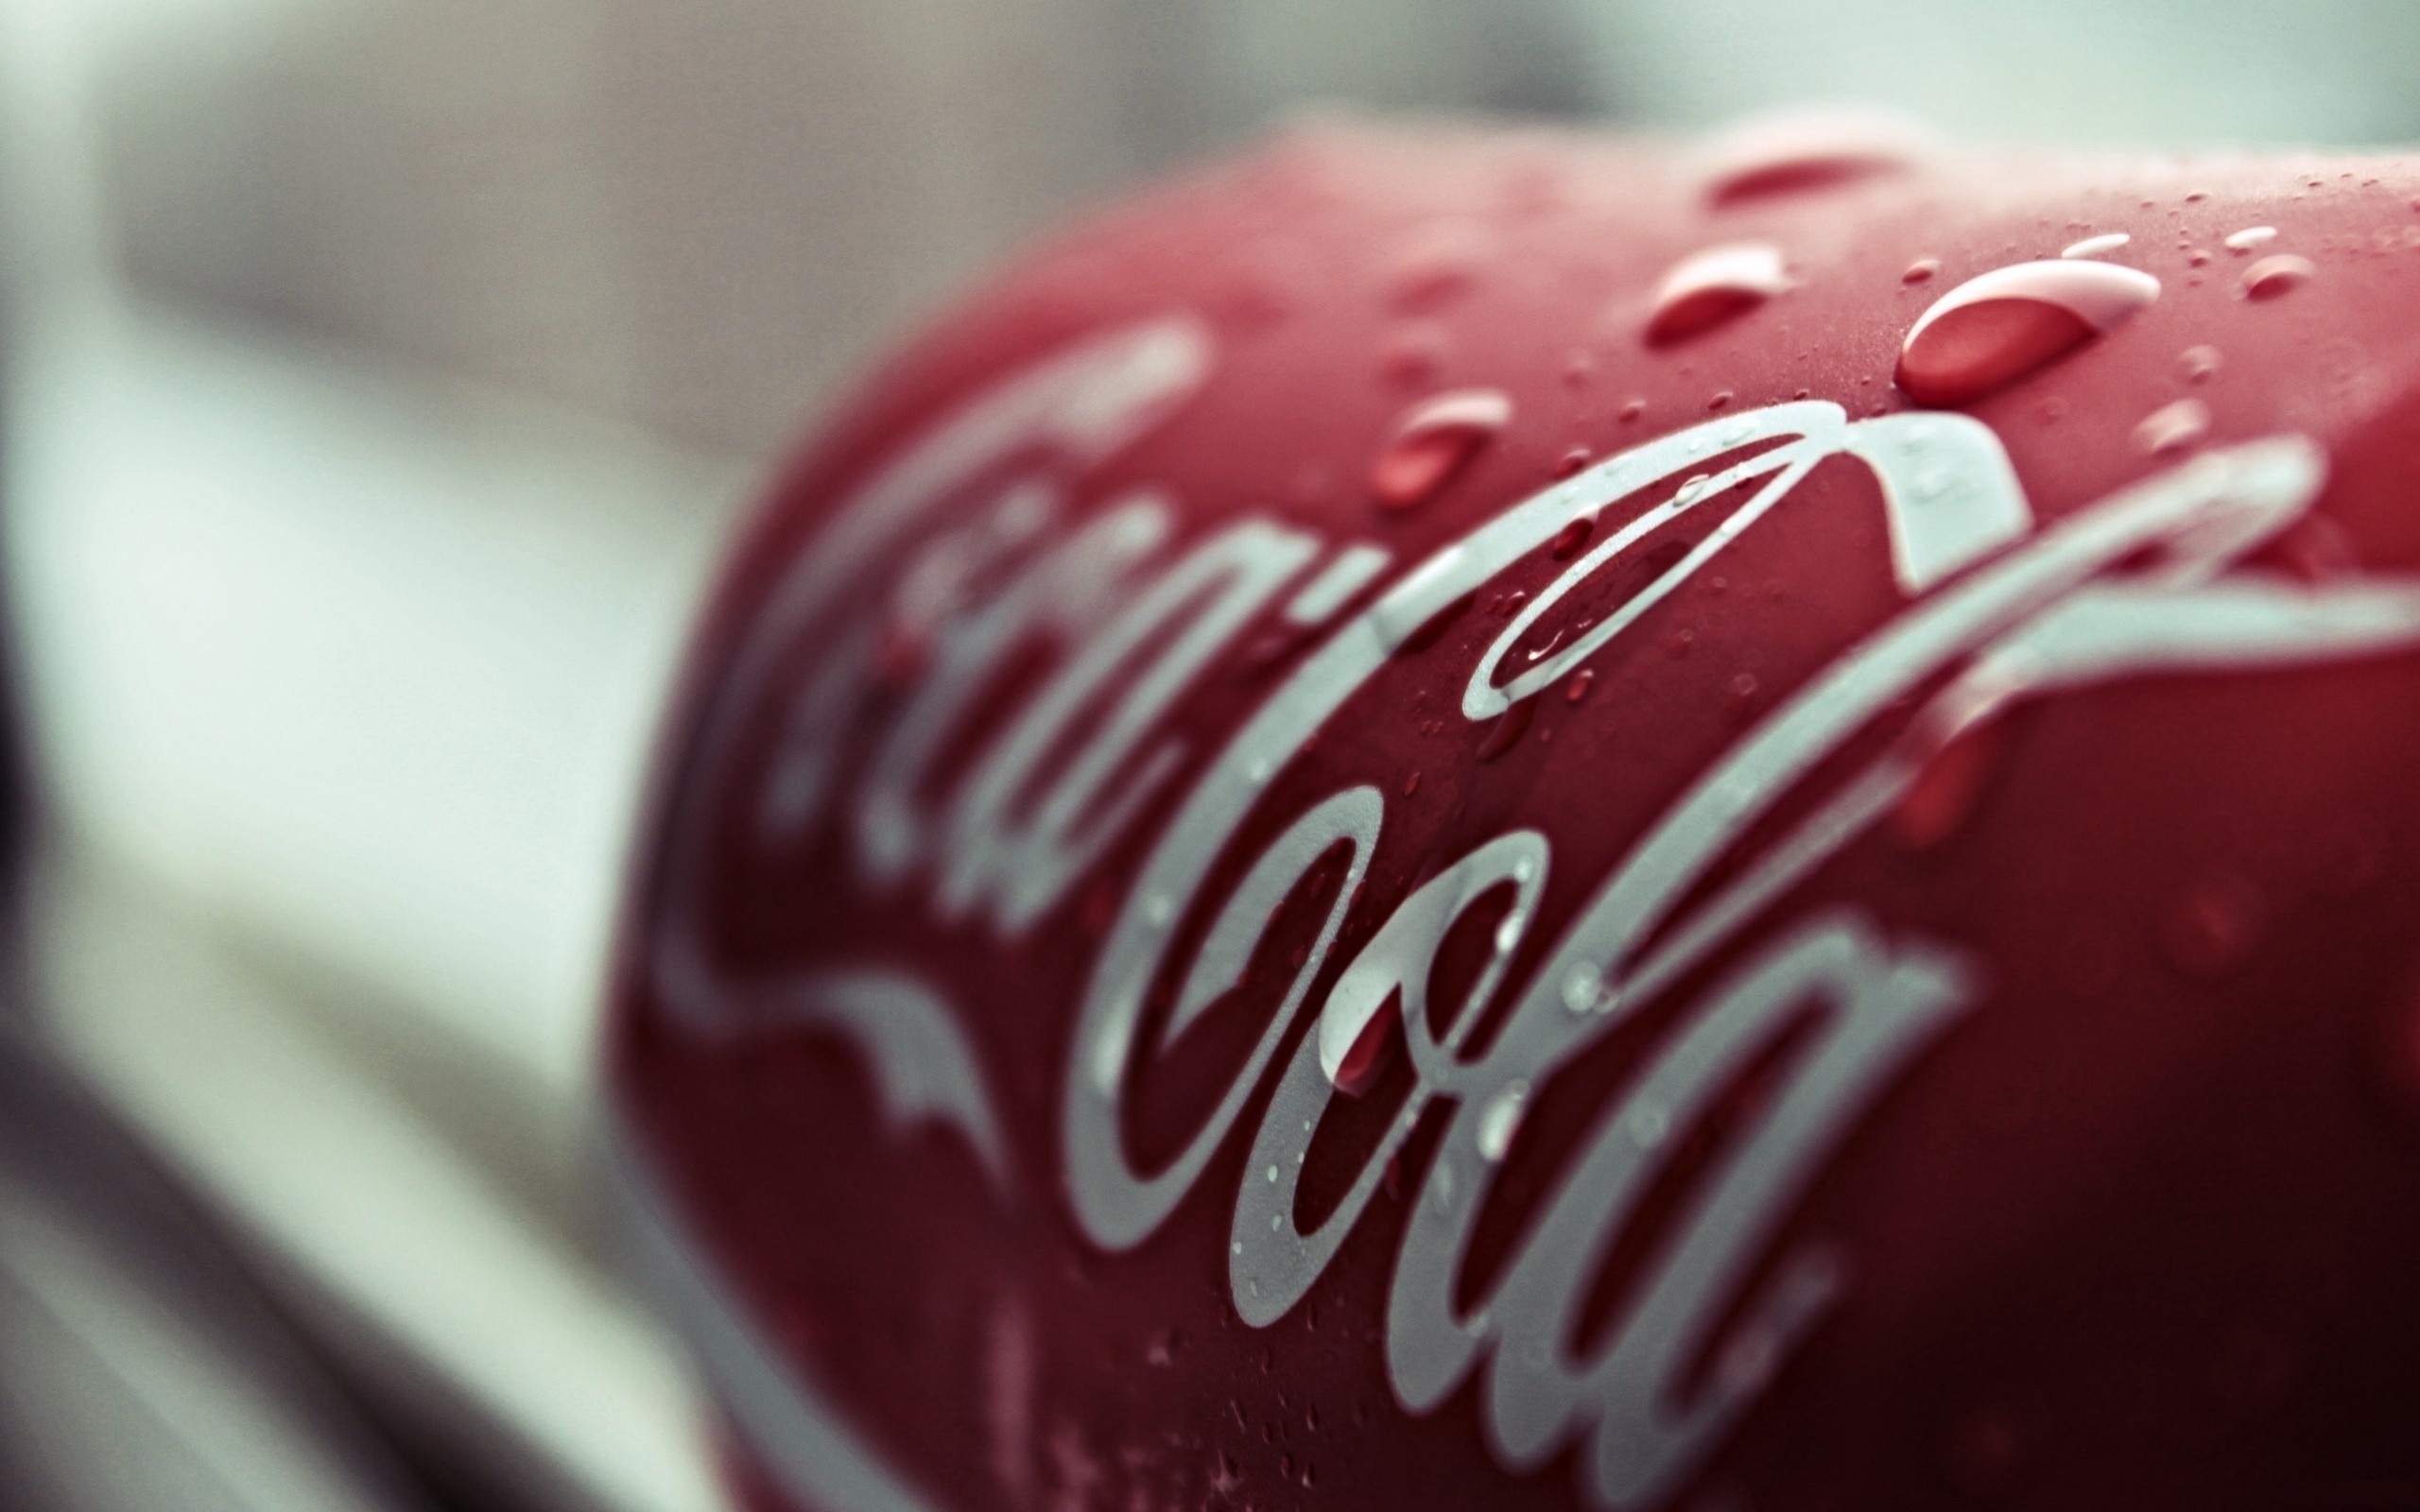 Coca-Cola: The world's largest nonalcoholic beverage company. 2560x1600 HD Wallpaper.